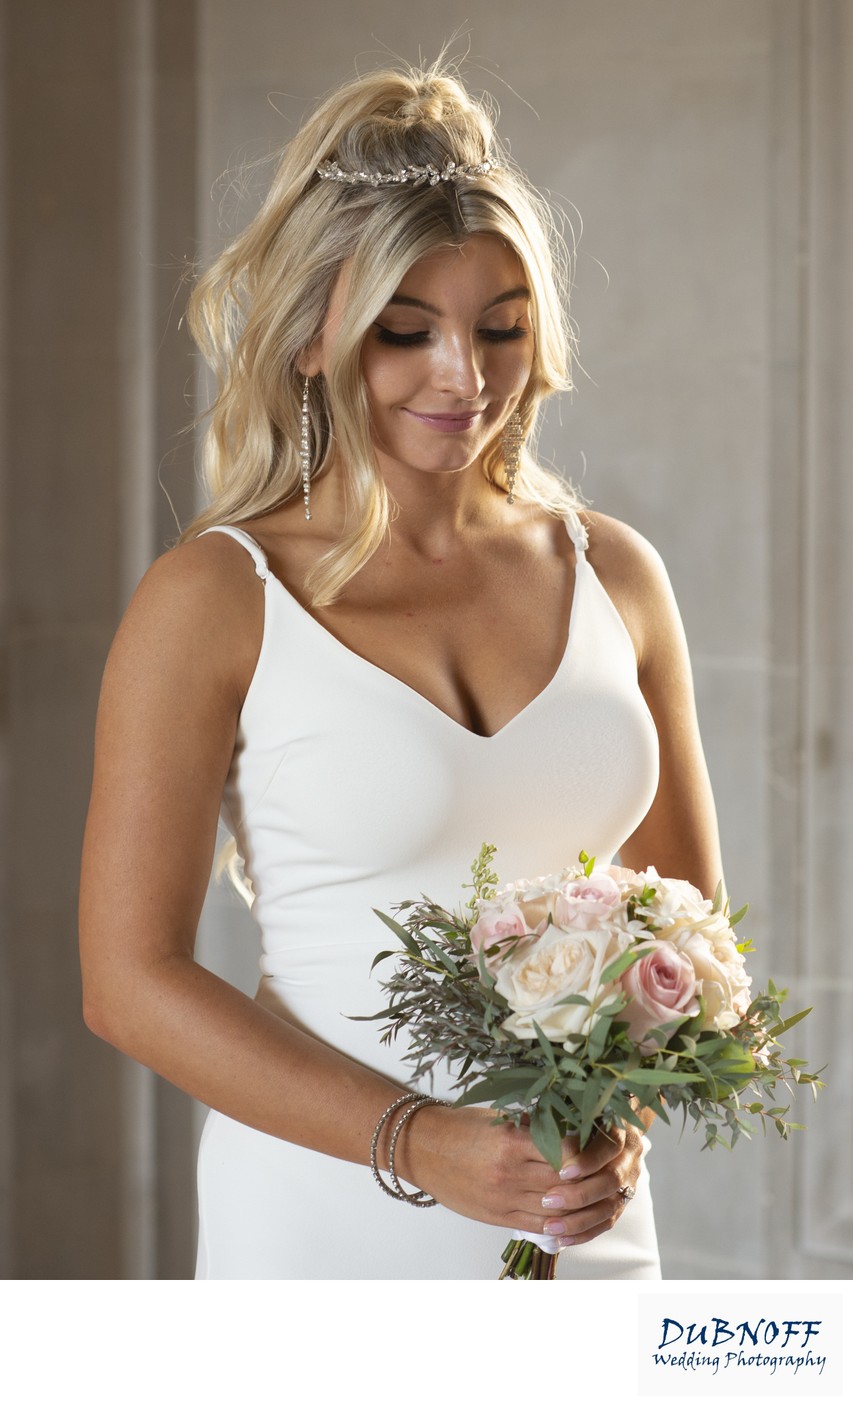 San Francisco bride with bouquet of flowers